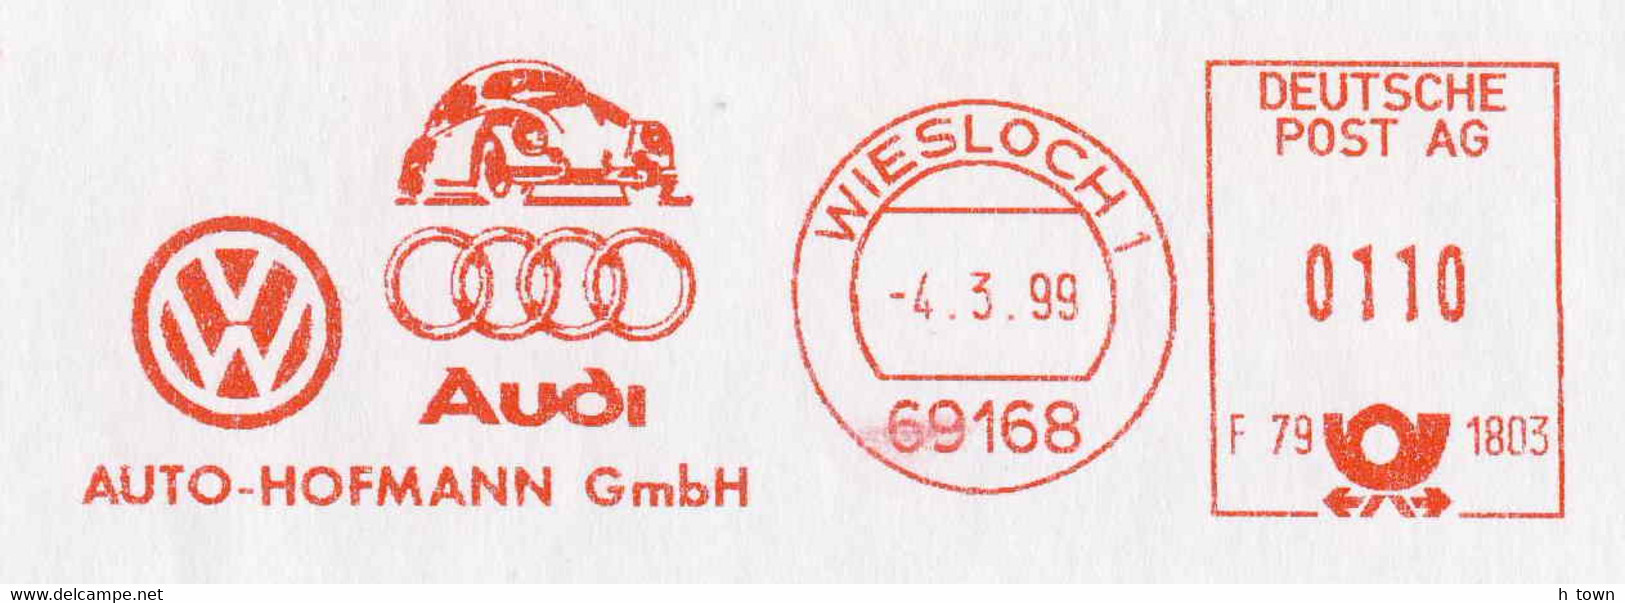 224  VW Coccinelle: Ema D'Allemagne, 1999 - Volkswagen Beetle Meter Stamp From Wiesloch, Germany, Audi - Cars